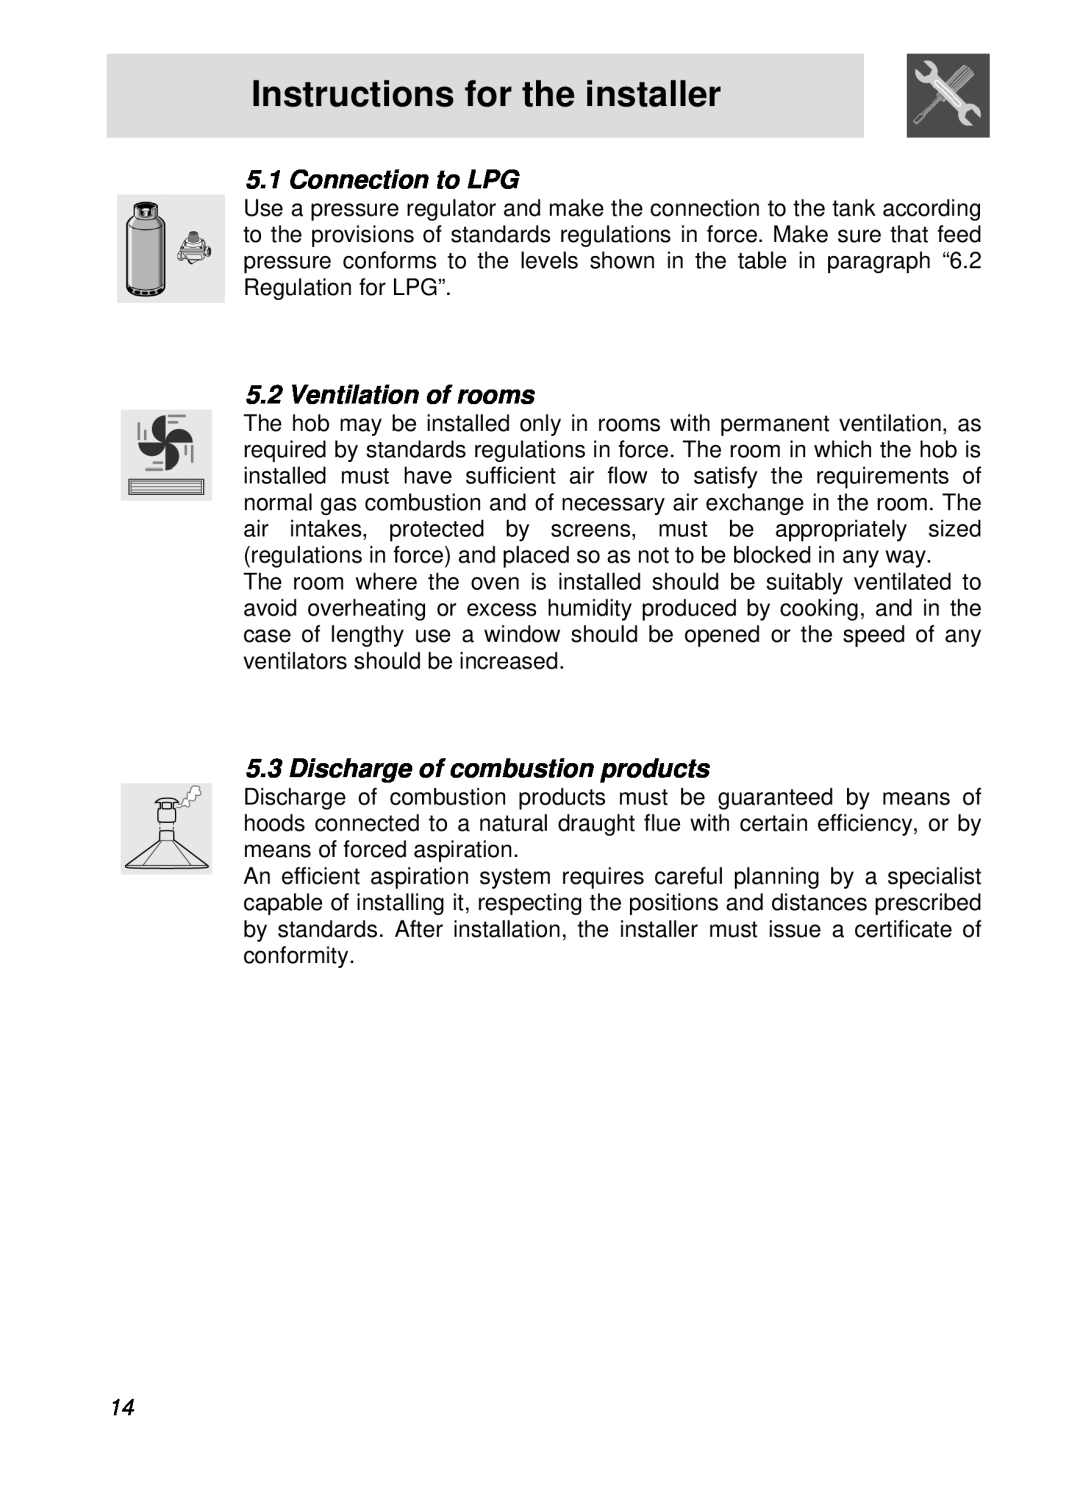 Smeg CIR60X Connection to LPG, Ventilation of rooms, Discharge of combustion products, Instructions for the installer 